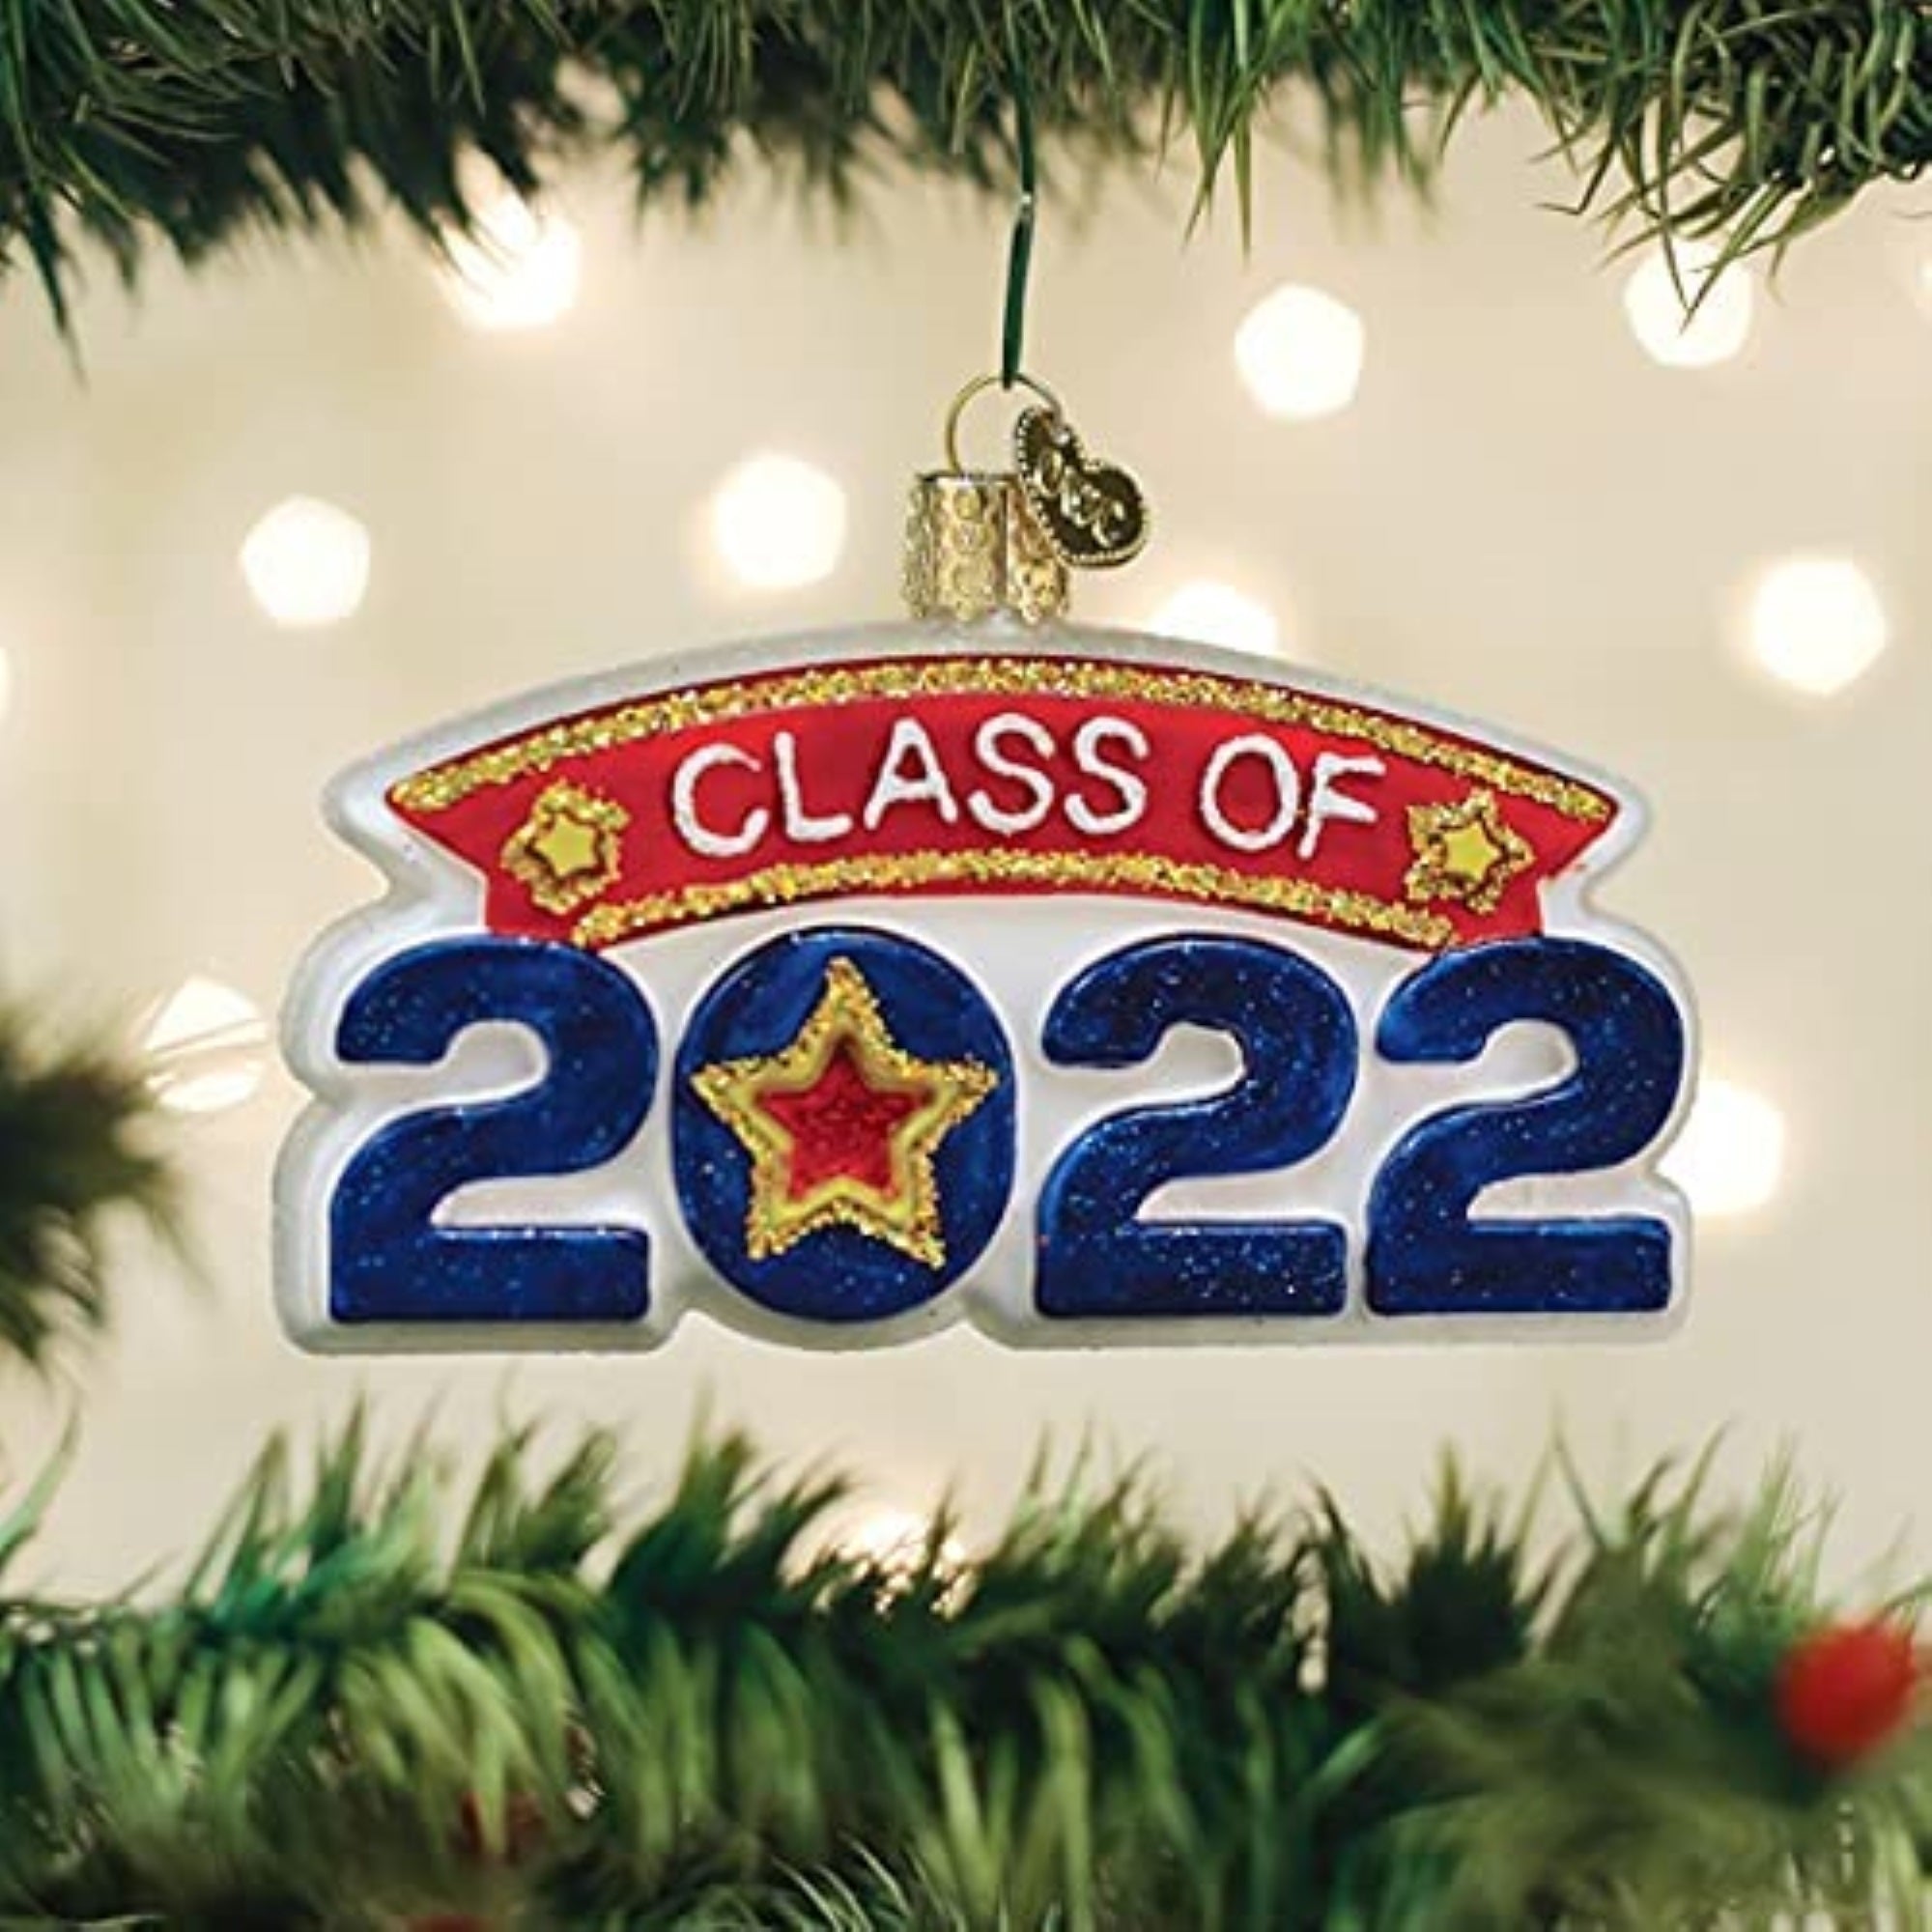 Old World Christmas Glass Blown Ornament, Class of 2022